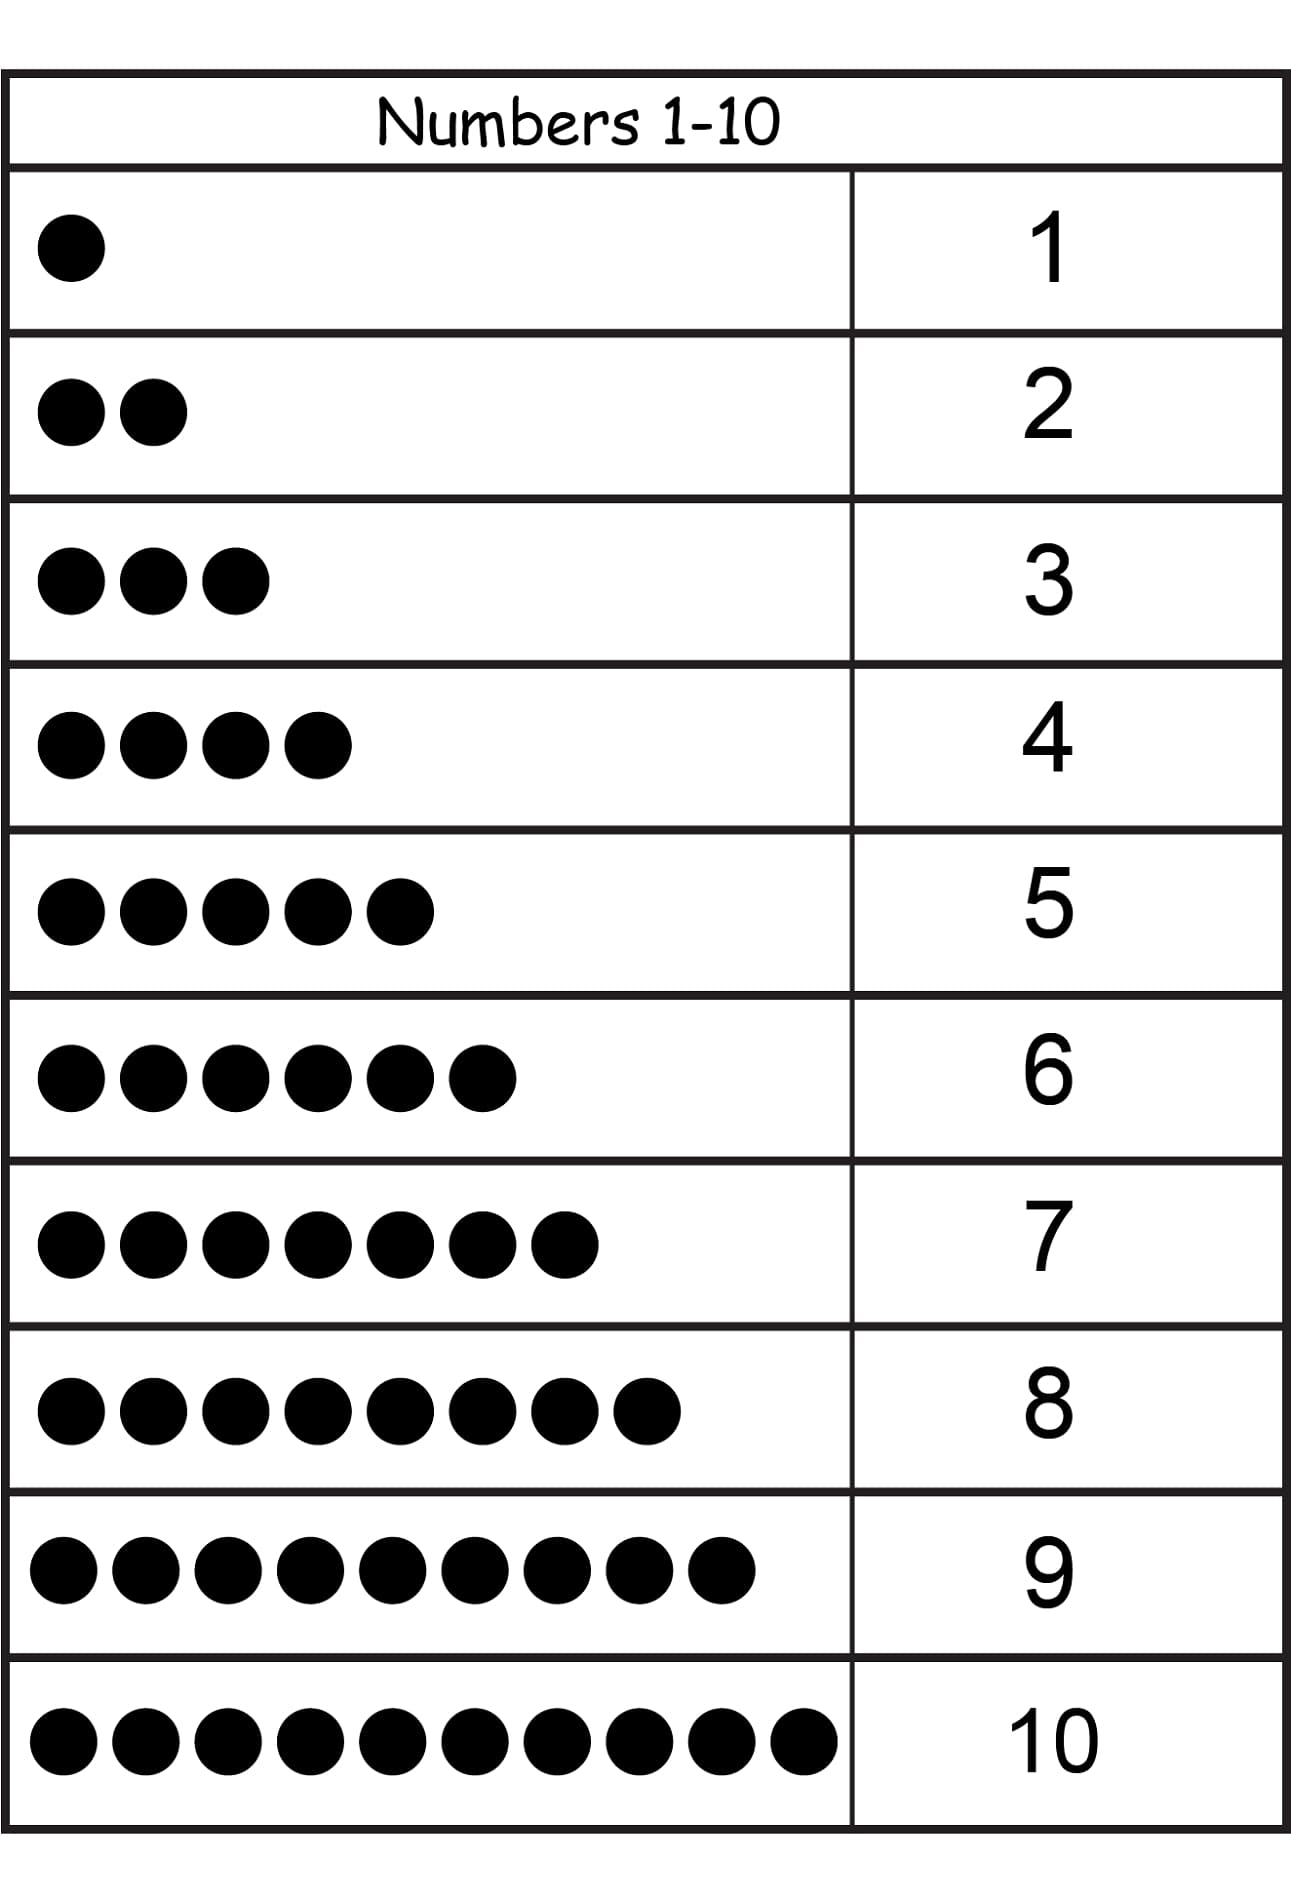 Printable Counting By 10s Chart_21877